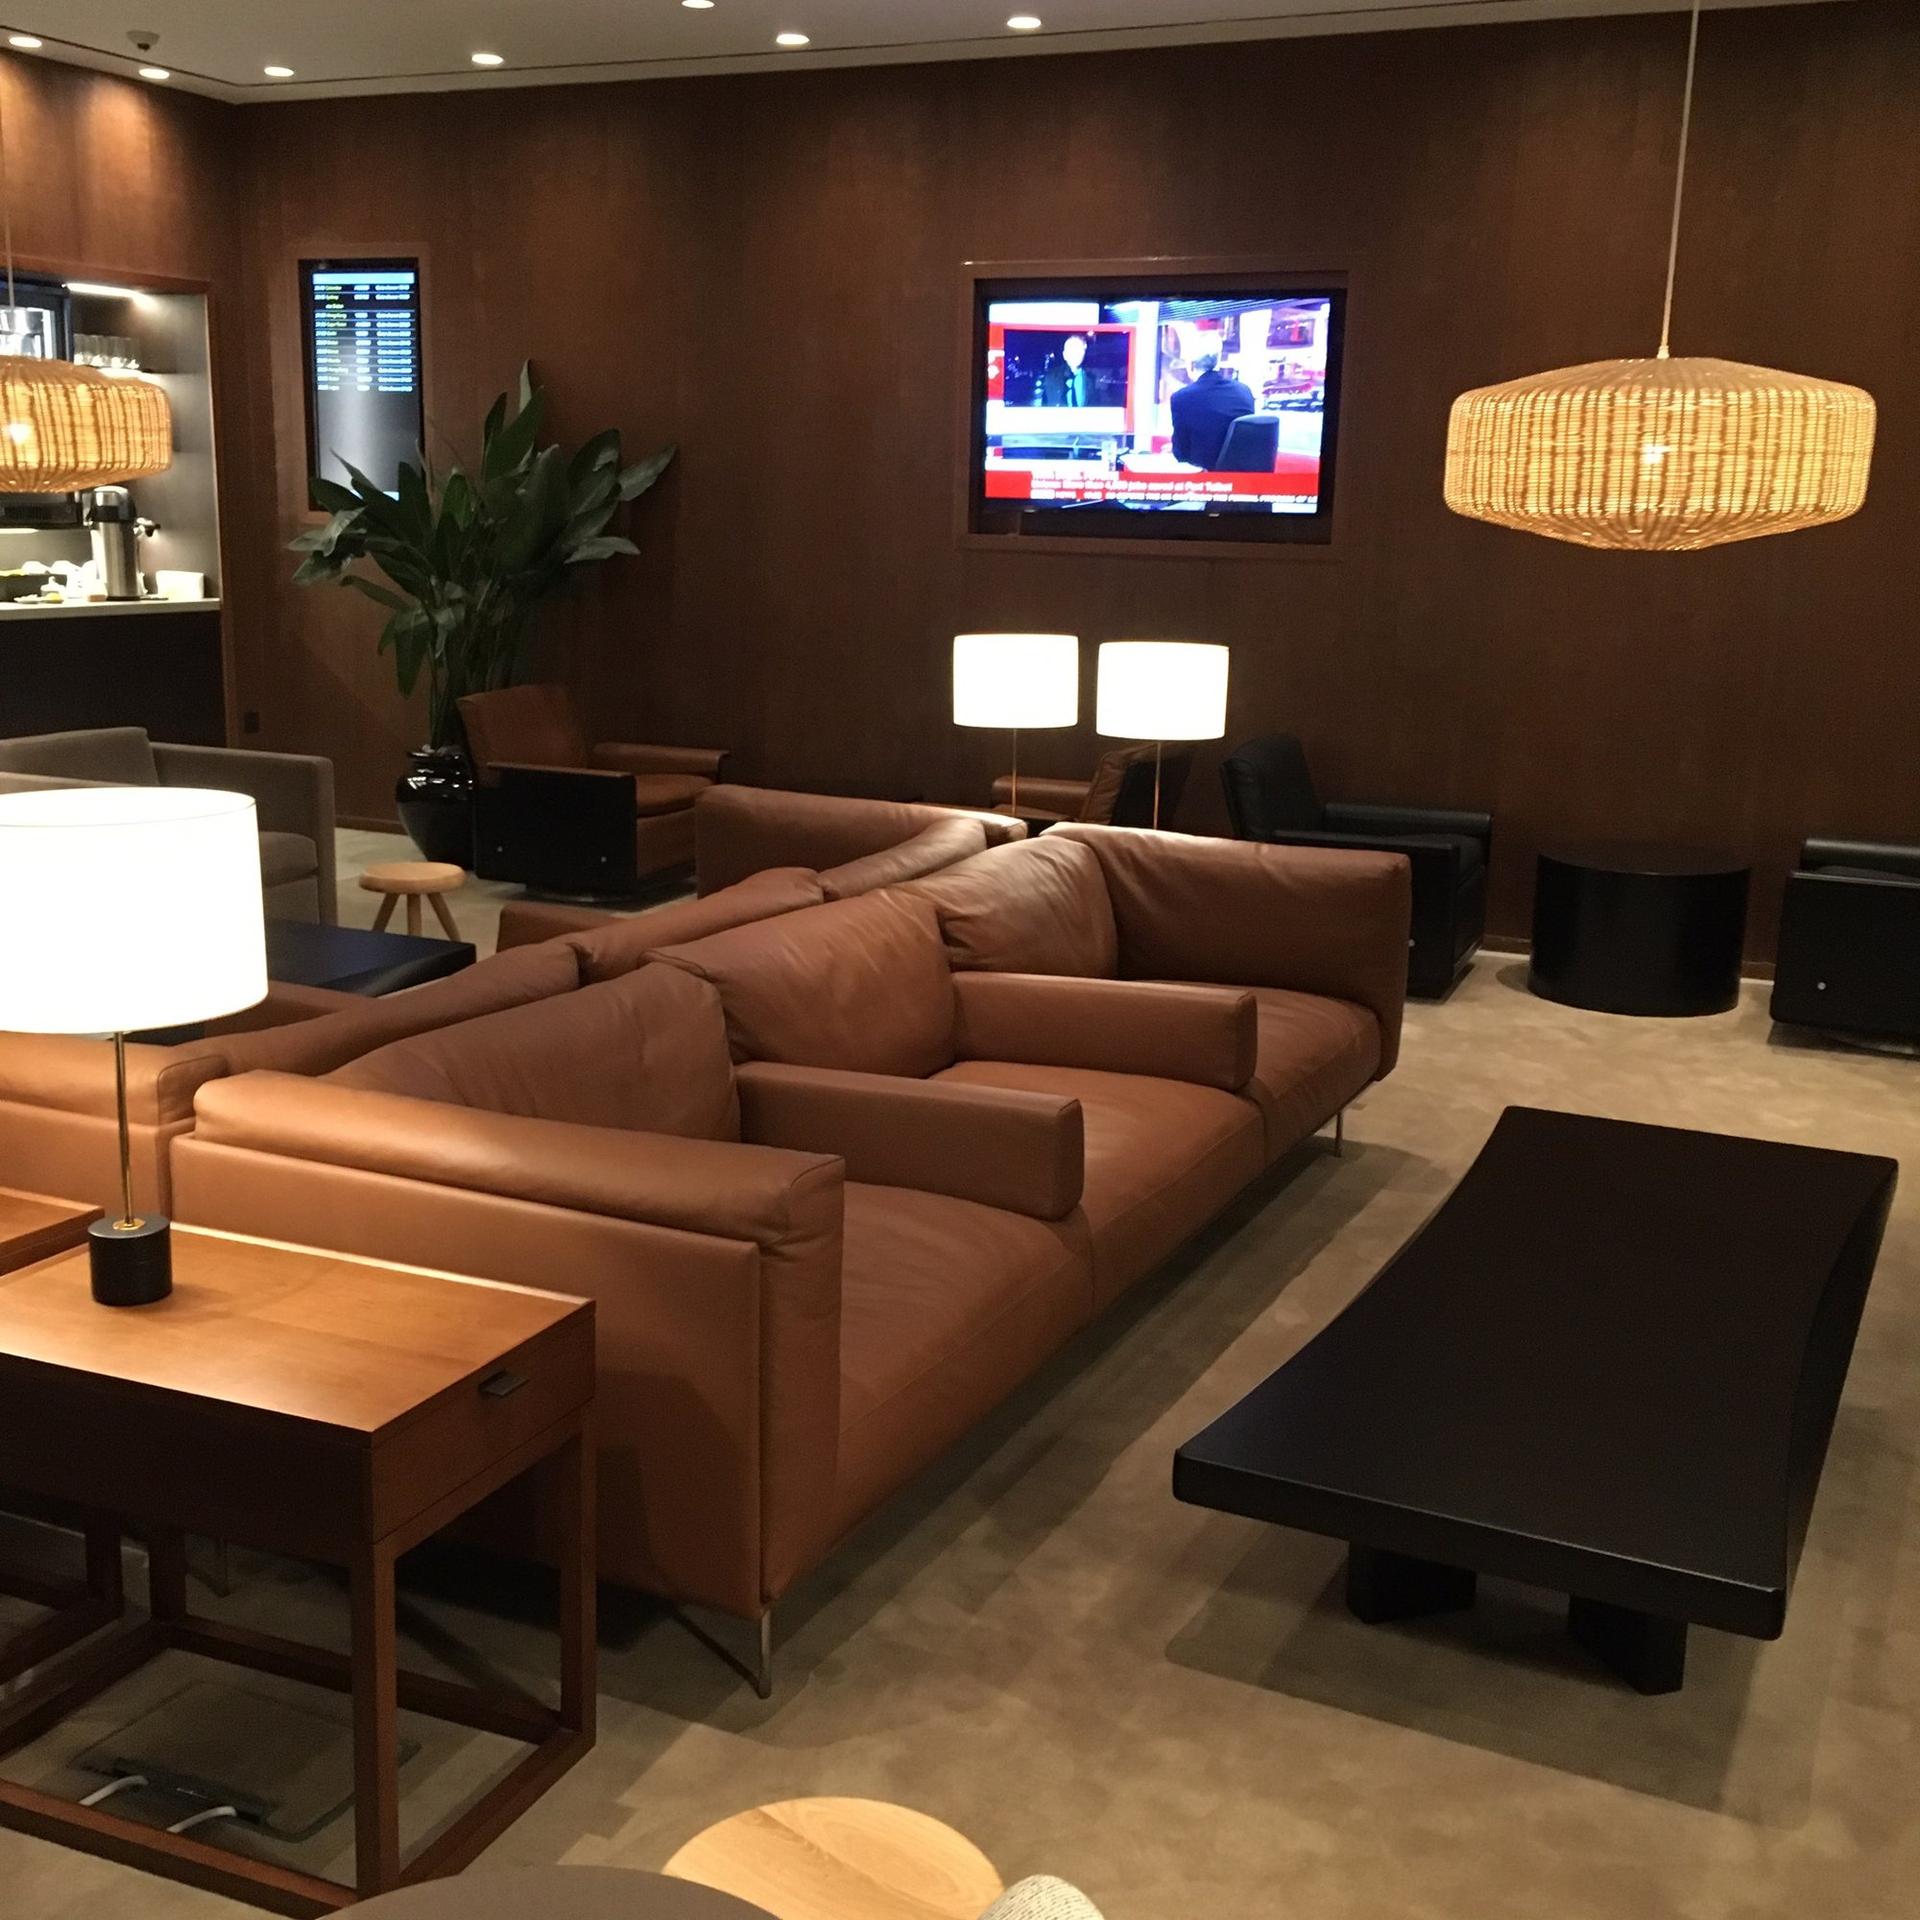 Cathay Pacific Business Class Lounge image 26 of 48